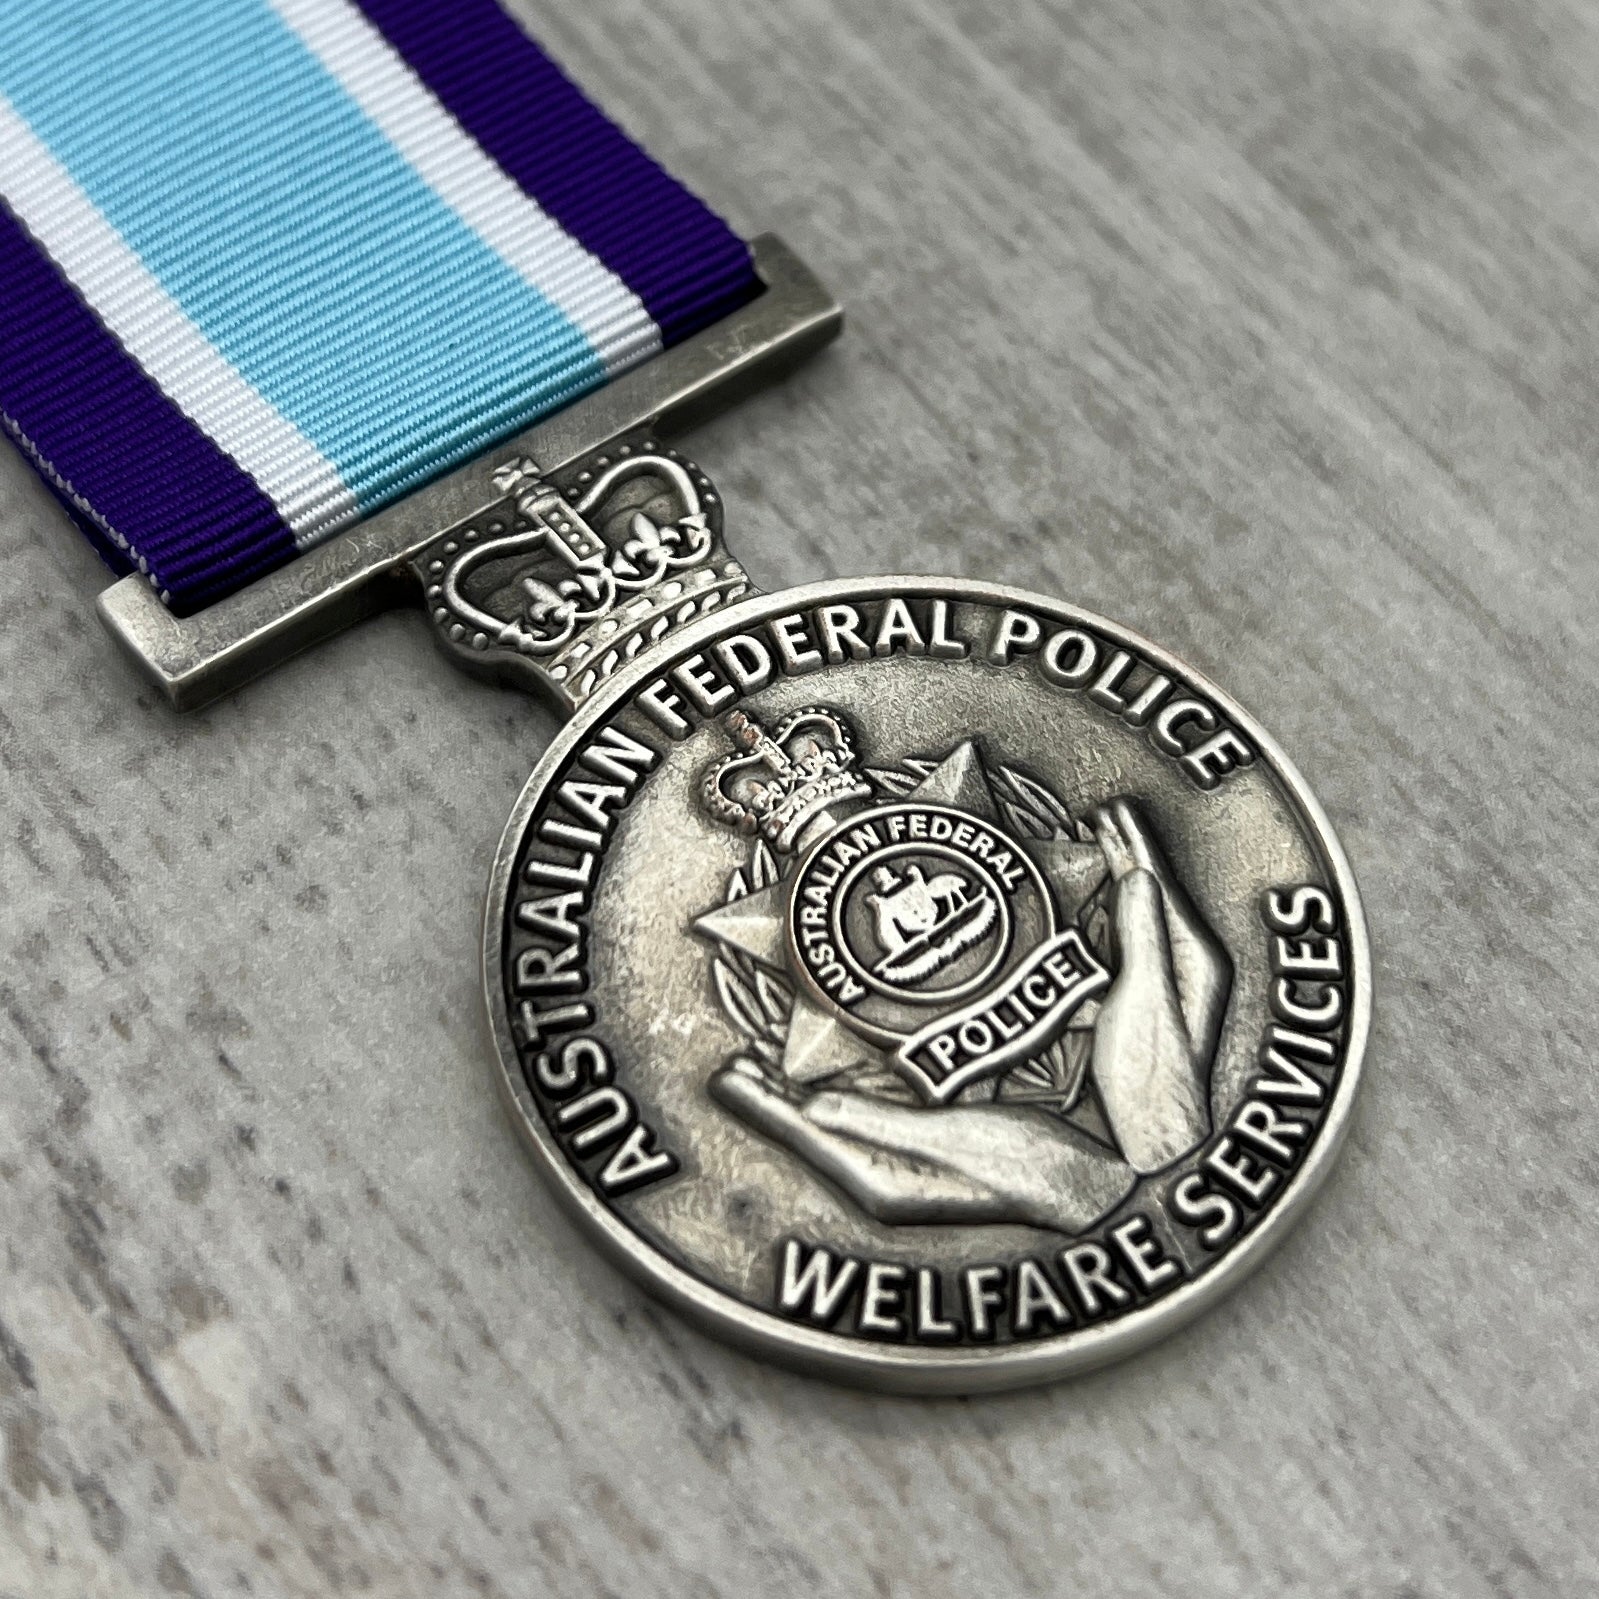 Australian Federal Police - Welfare Service Medal - Foxhole Medals